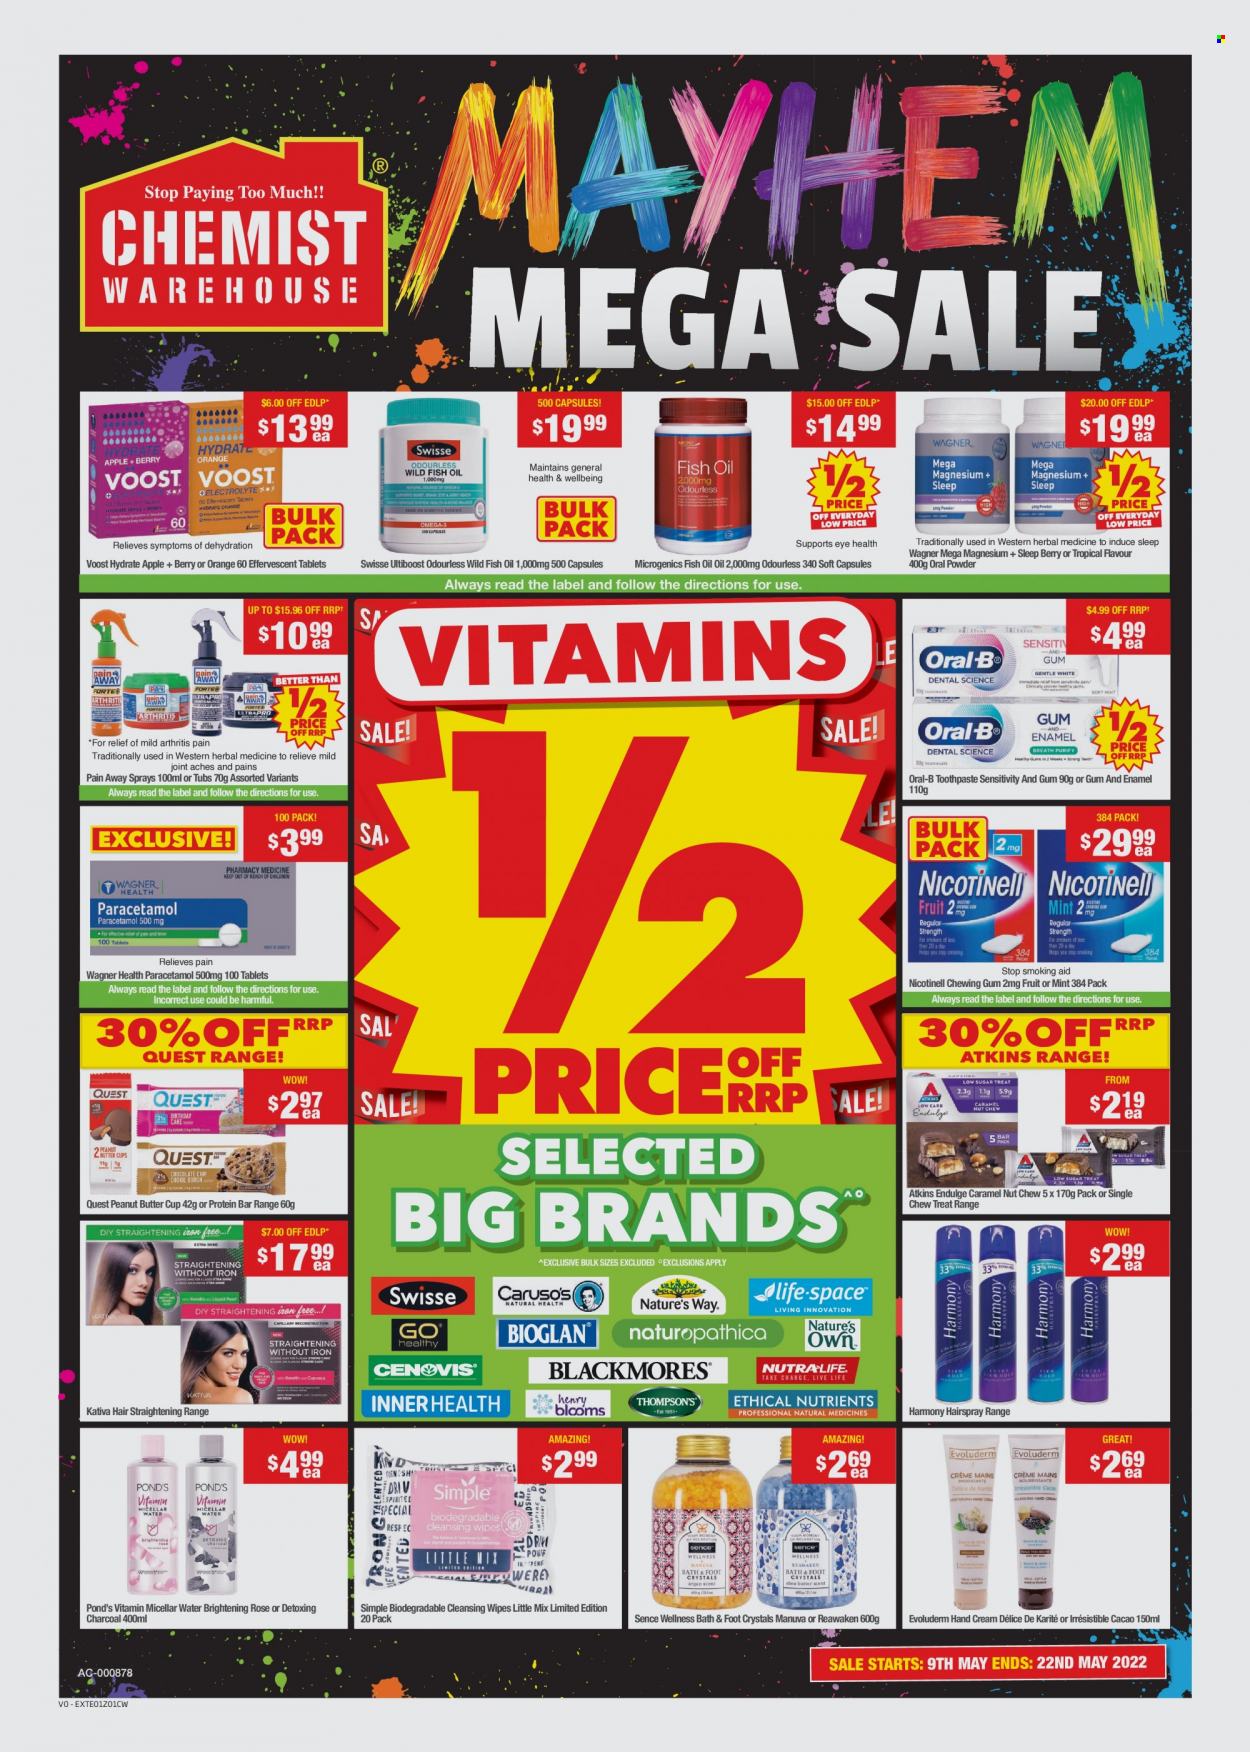 thumbnail - Chemist Warehouse Catalogue - 9 May 2022 - 22 May 2022 - Sales products - cleansing wipes, wipes, POND'S, Swisse, Oral-B, toothpaste, micellar water, hand cream, fish oil, magnesium. Page 1.